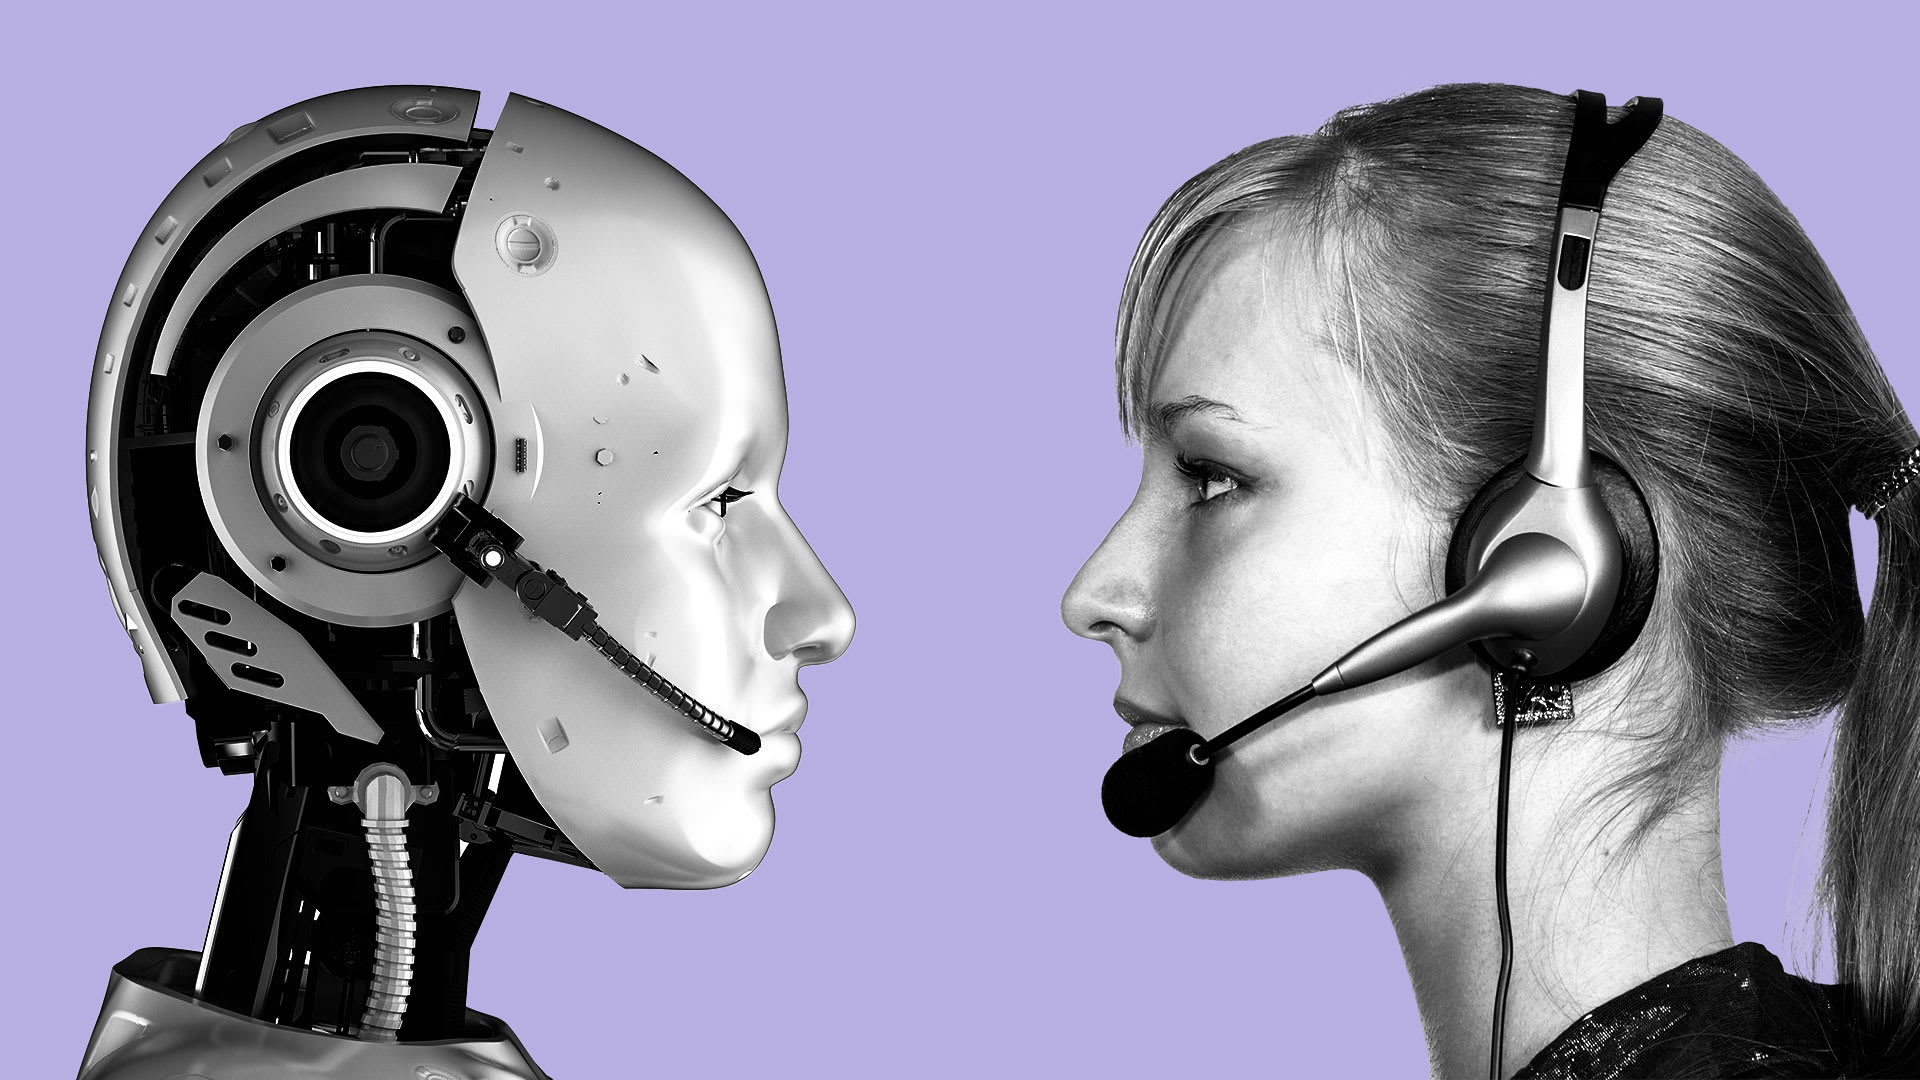 AI robot facing a human contact center employee, robot and human facing one another wearing headsets, purple background with black and white robot and human images facing one another